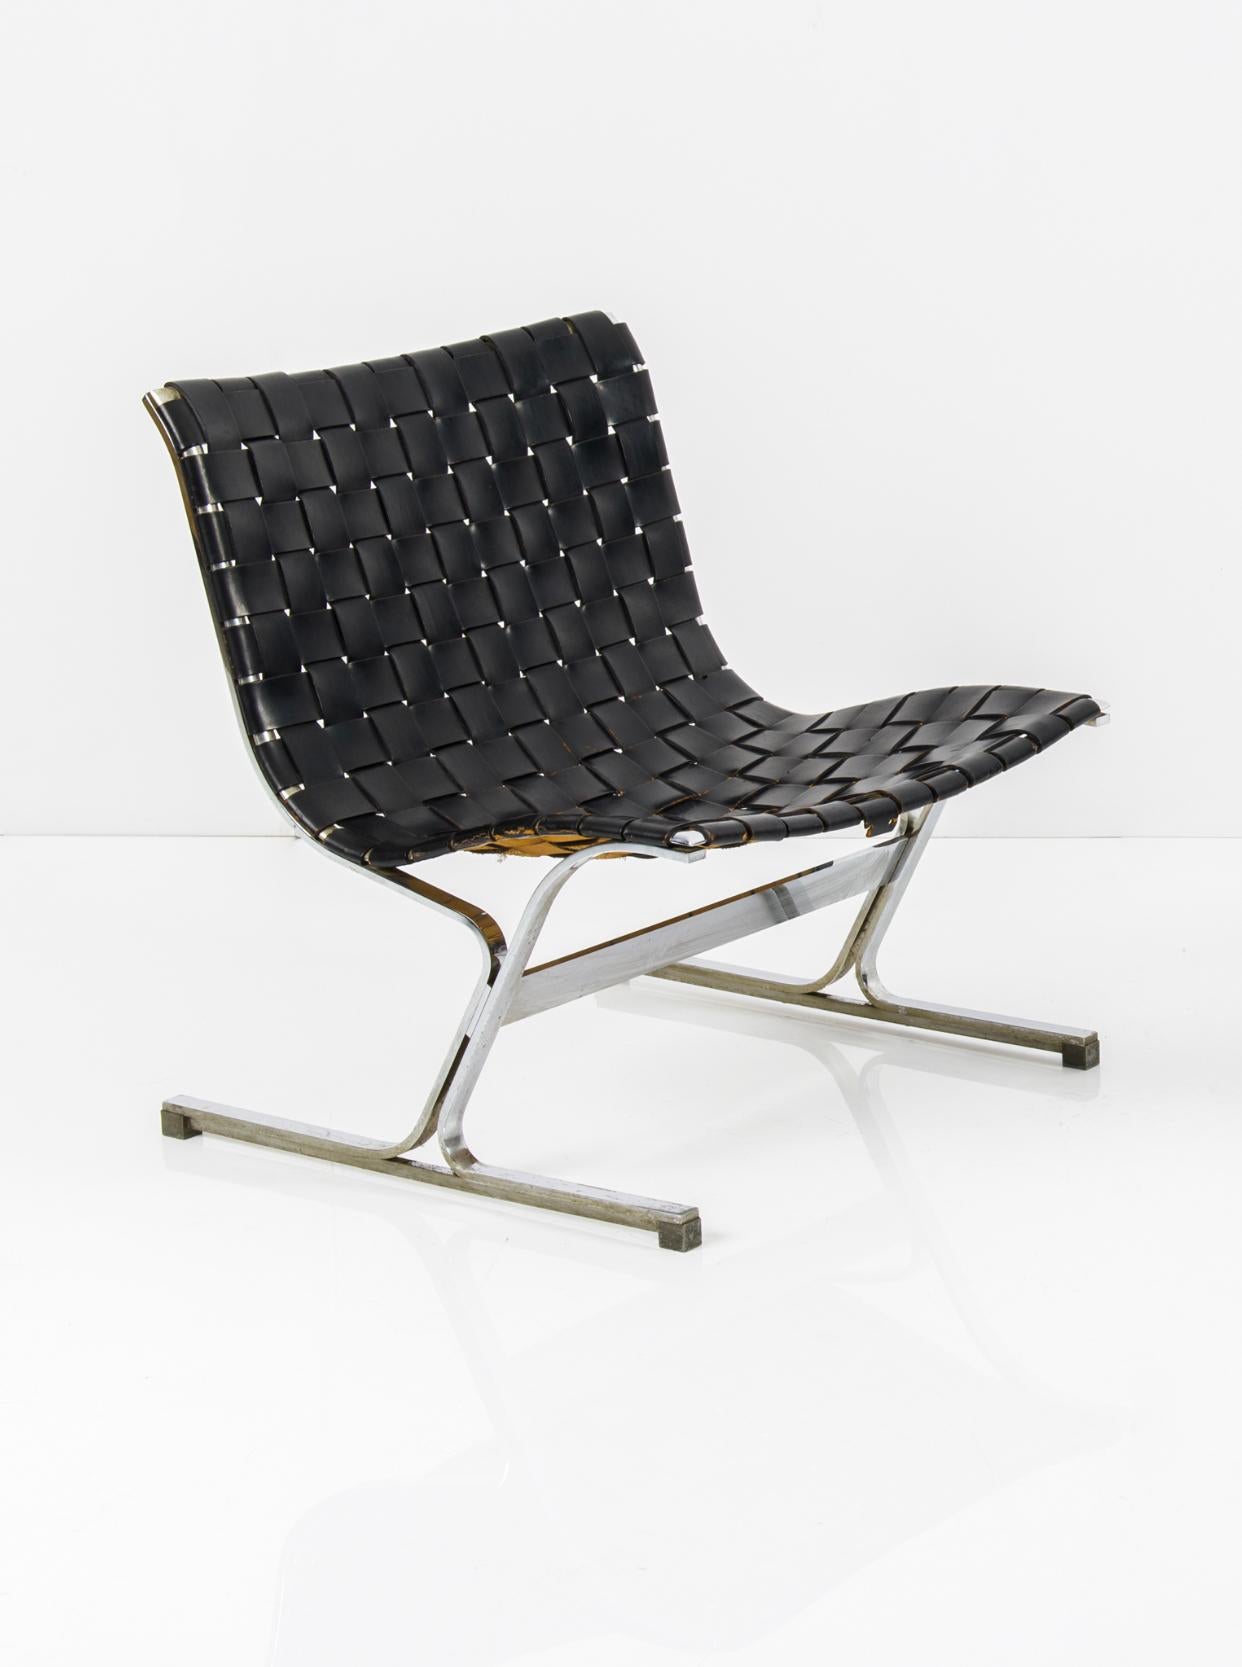 Italian Pair of Black Leathear Lounge Chairs Designed by Ross Littel